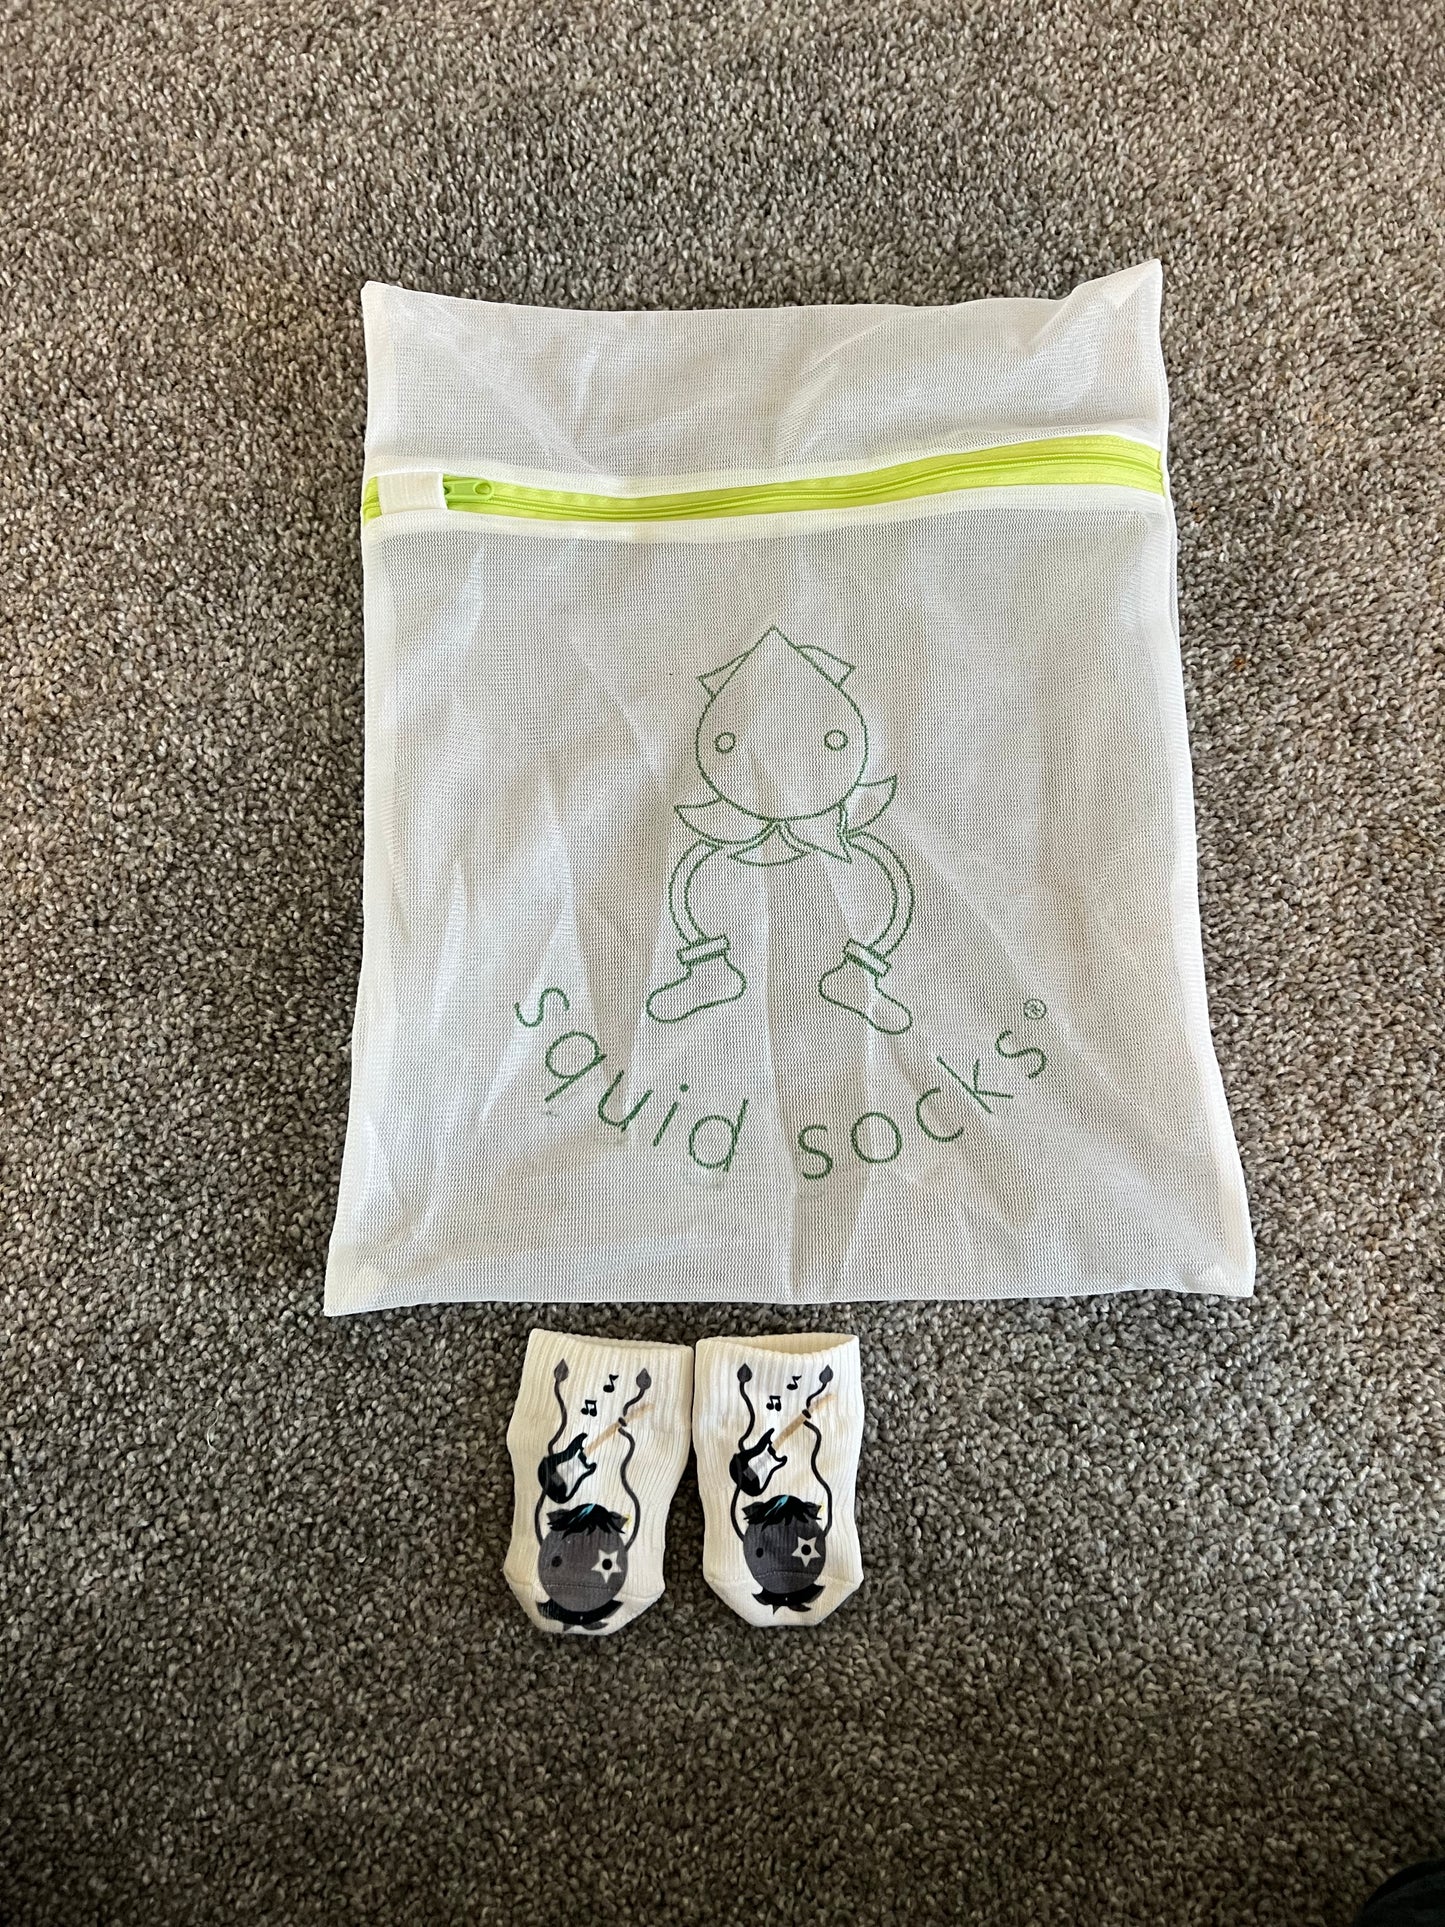 Squid Socks - 0-6 months - Calvin Collection - 1 pair - Rock-Star only